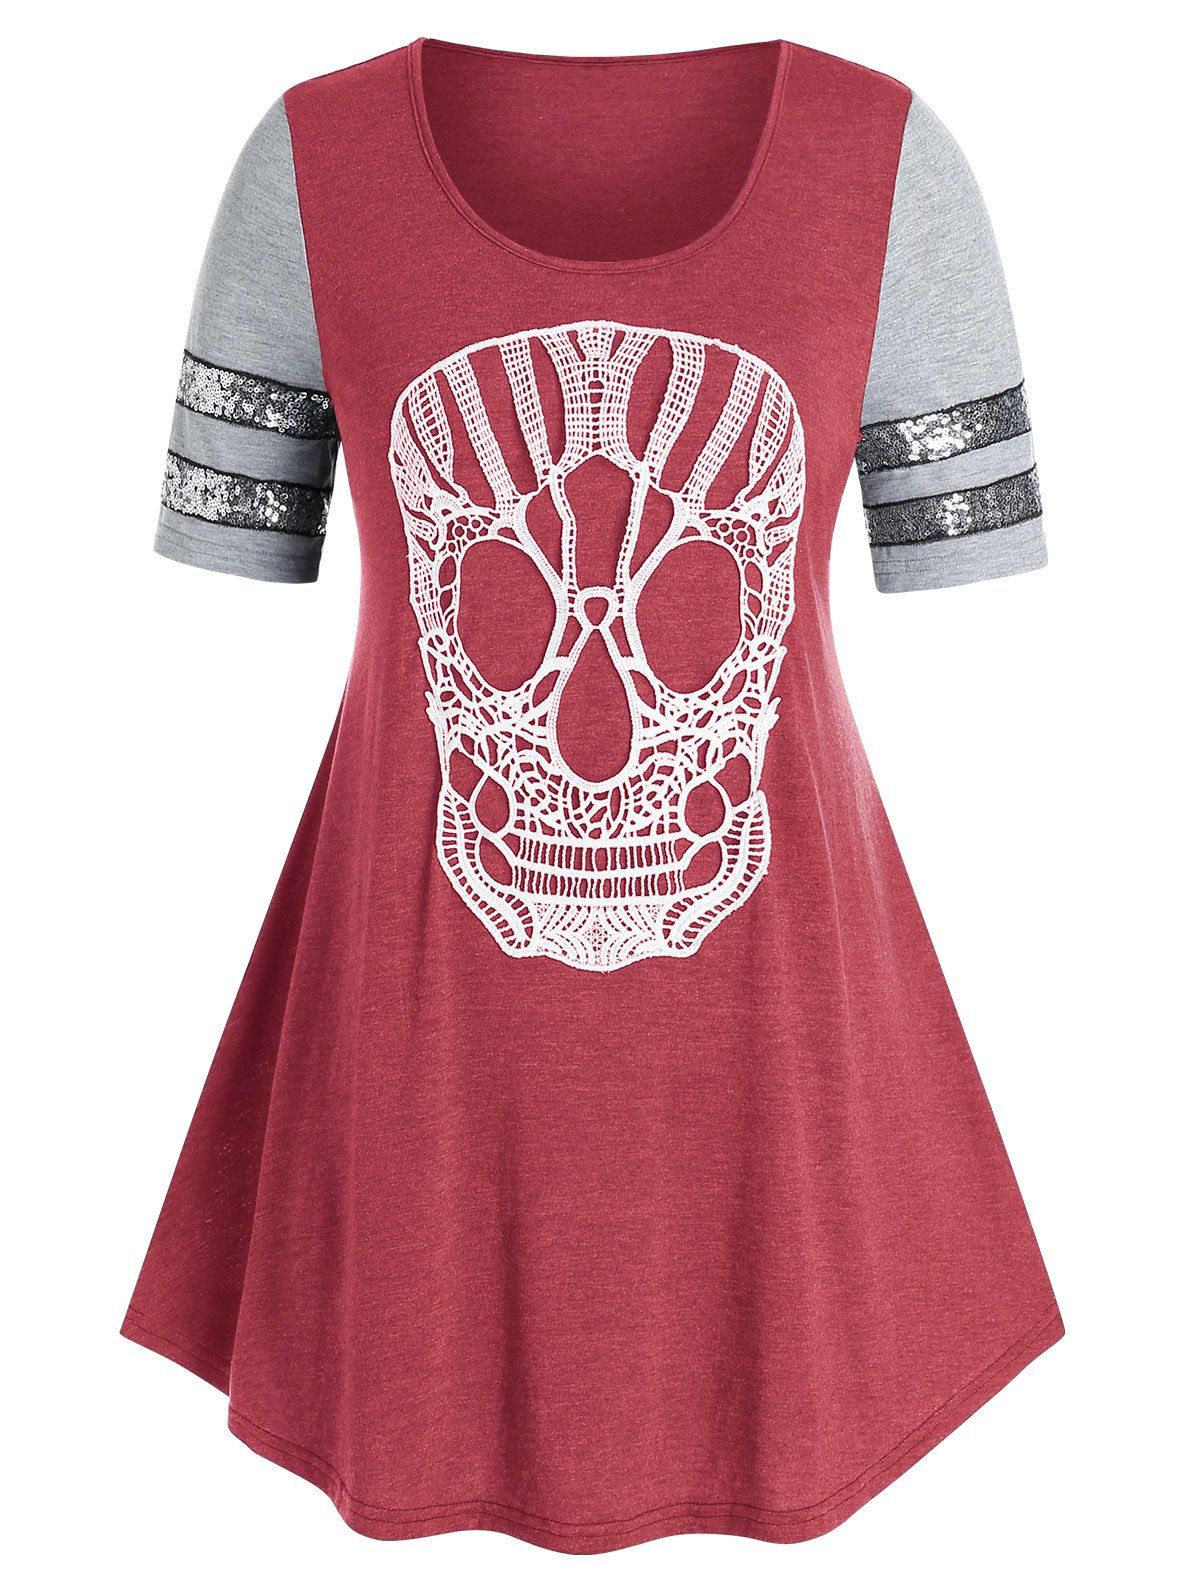 Plus Size Lace Skull Sequin T Shirt - RED L